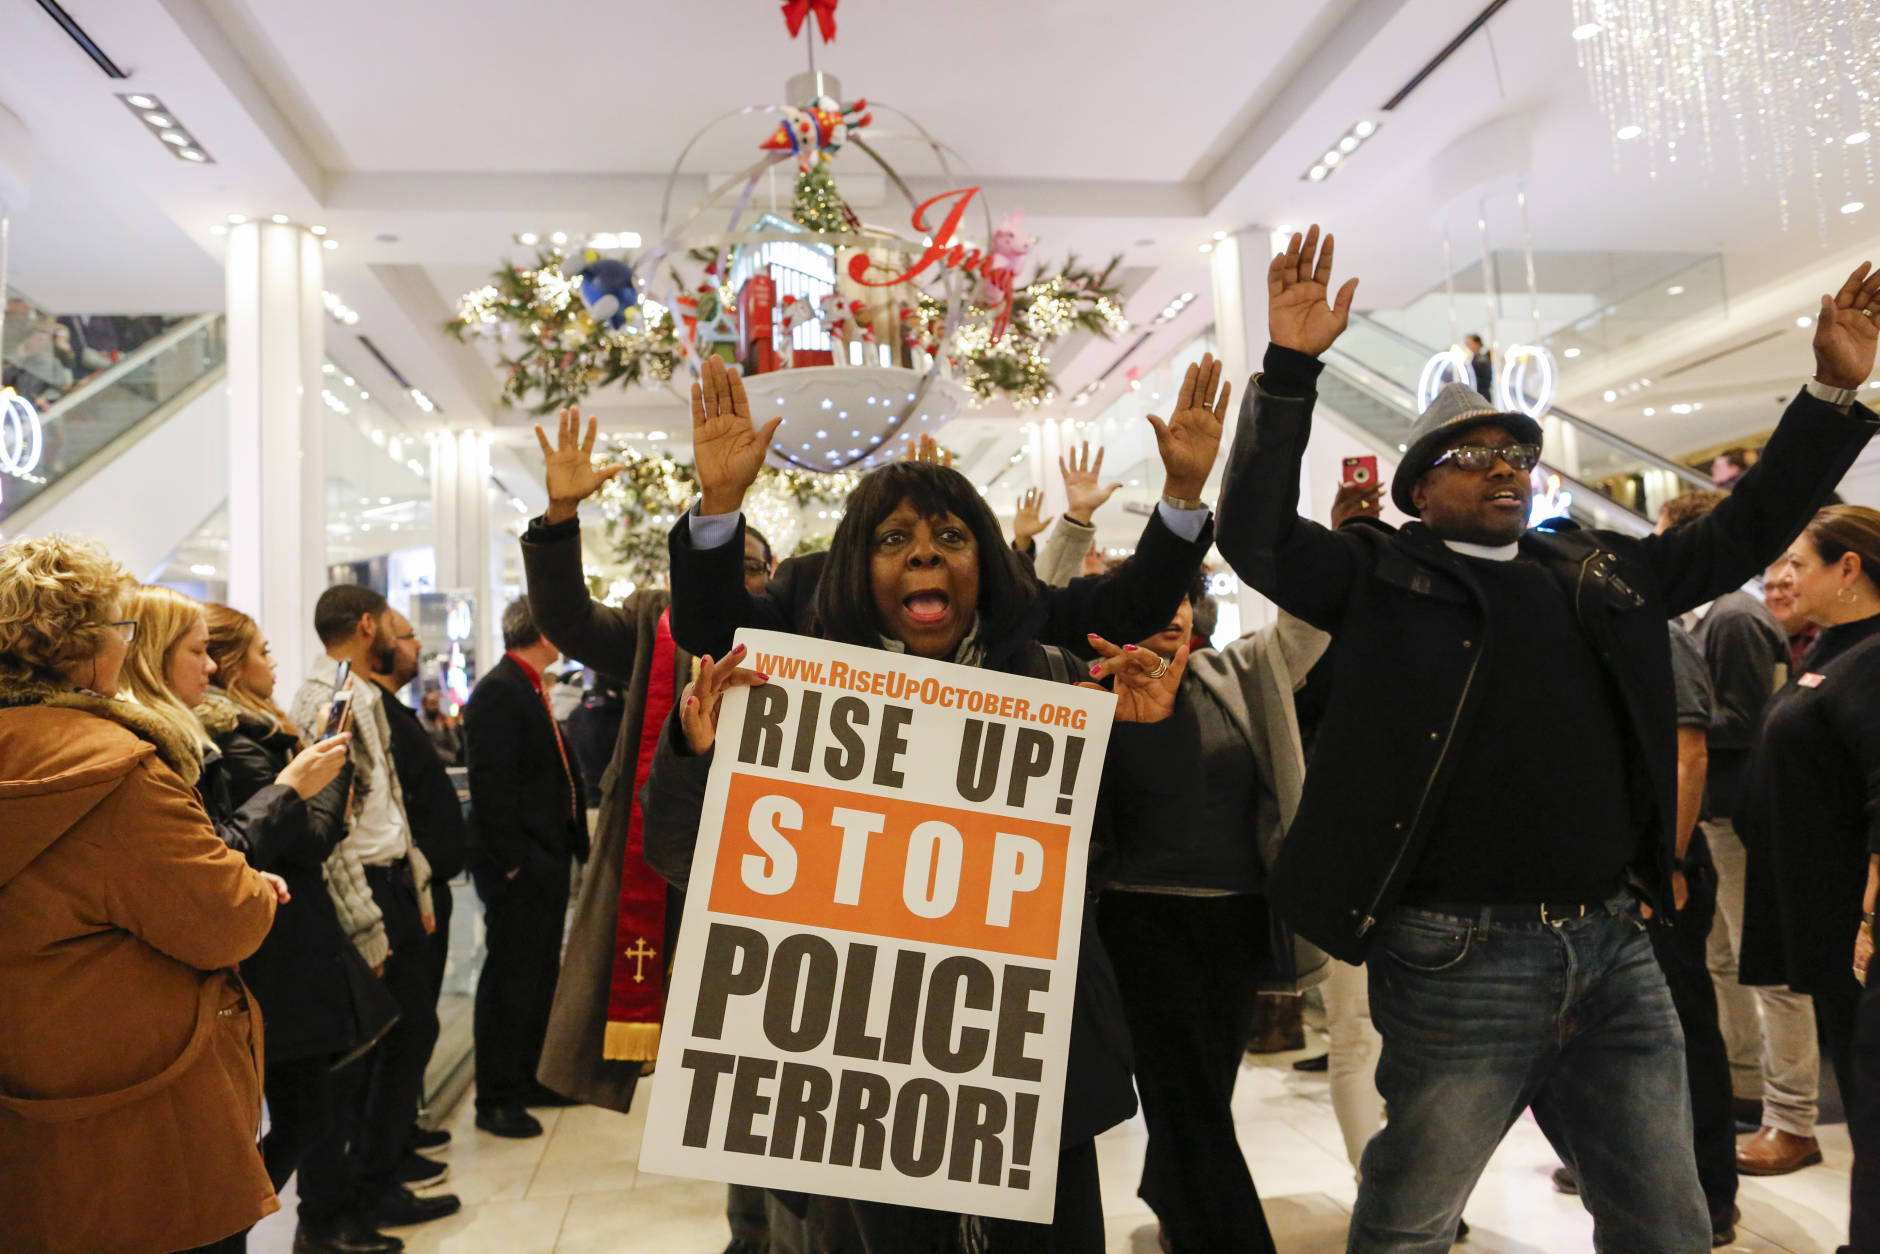 NEW YORK, NY - NOVEMBER 25:  Protesters hold up their hands as they demonstrate against racial injustice and police brutality during Black Friday events at Macy's retail store on November 25, 2016 in New York City.  In cities across the nation, protests are planned to disrupt Black Friday shopping. (Photo by Eduardo Munoz Alvarez/Getty Images)